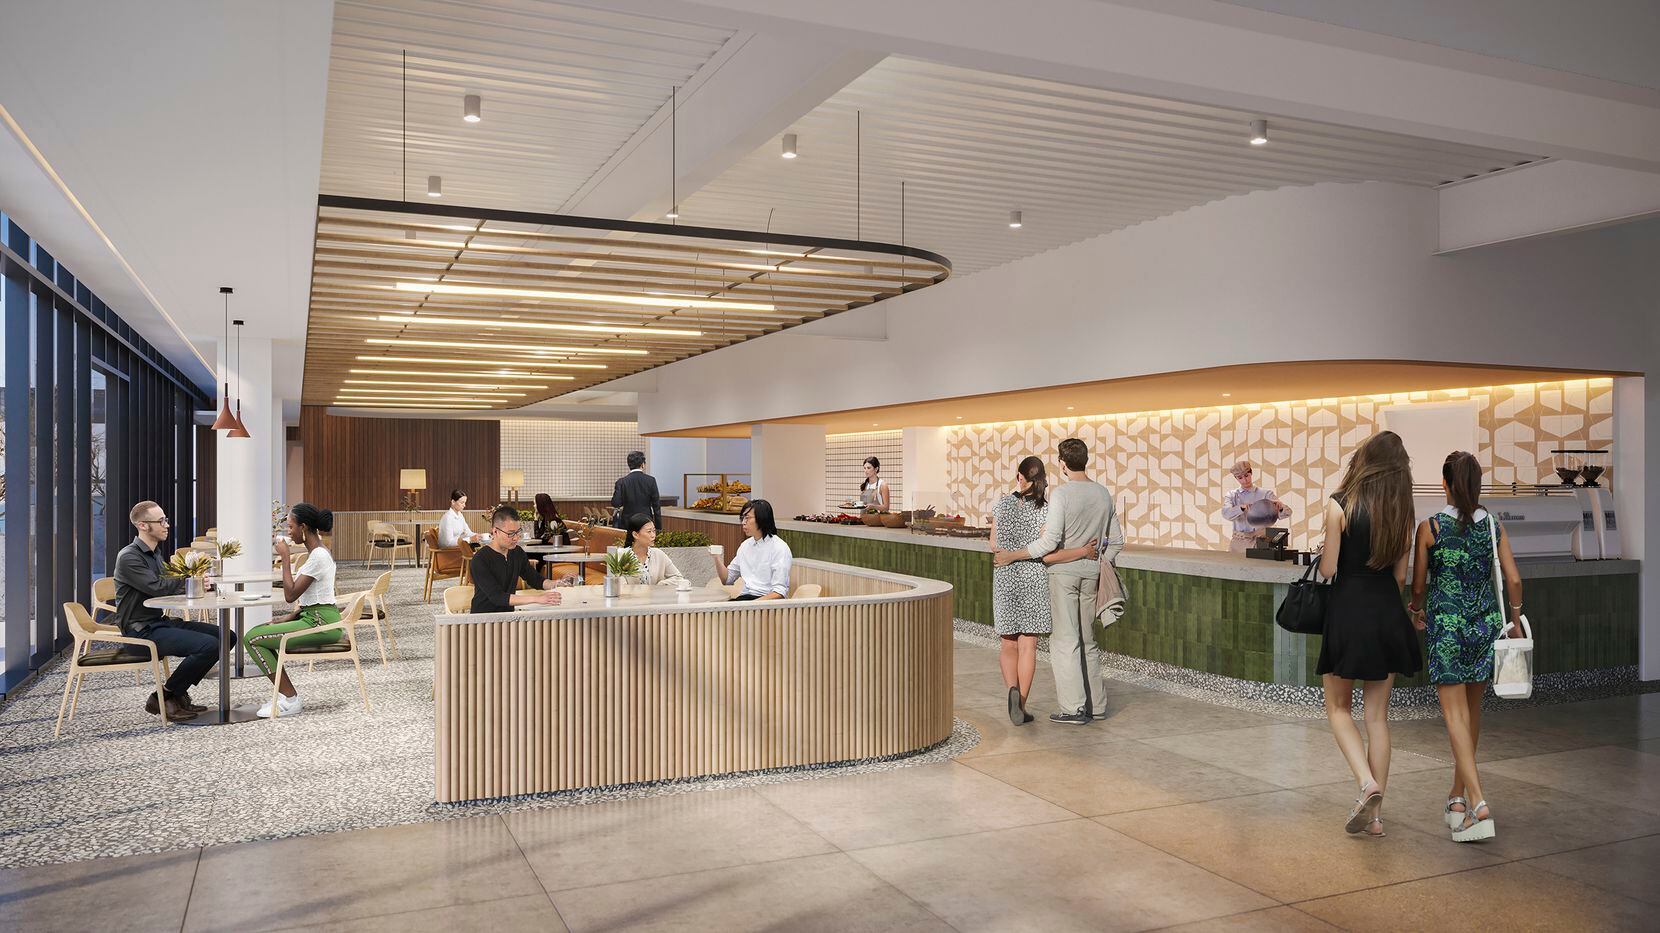 Inside Campbell Centre, tenants will get a refreshed cafe and new lounge and meeting areas.